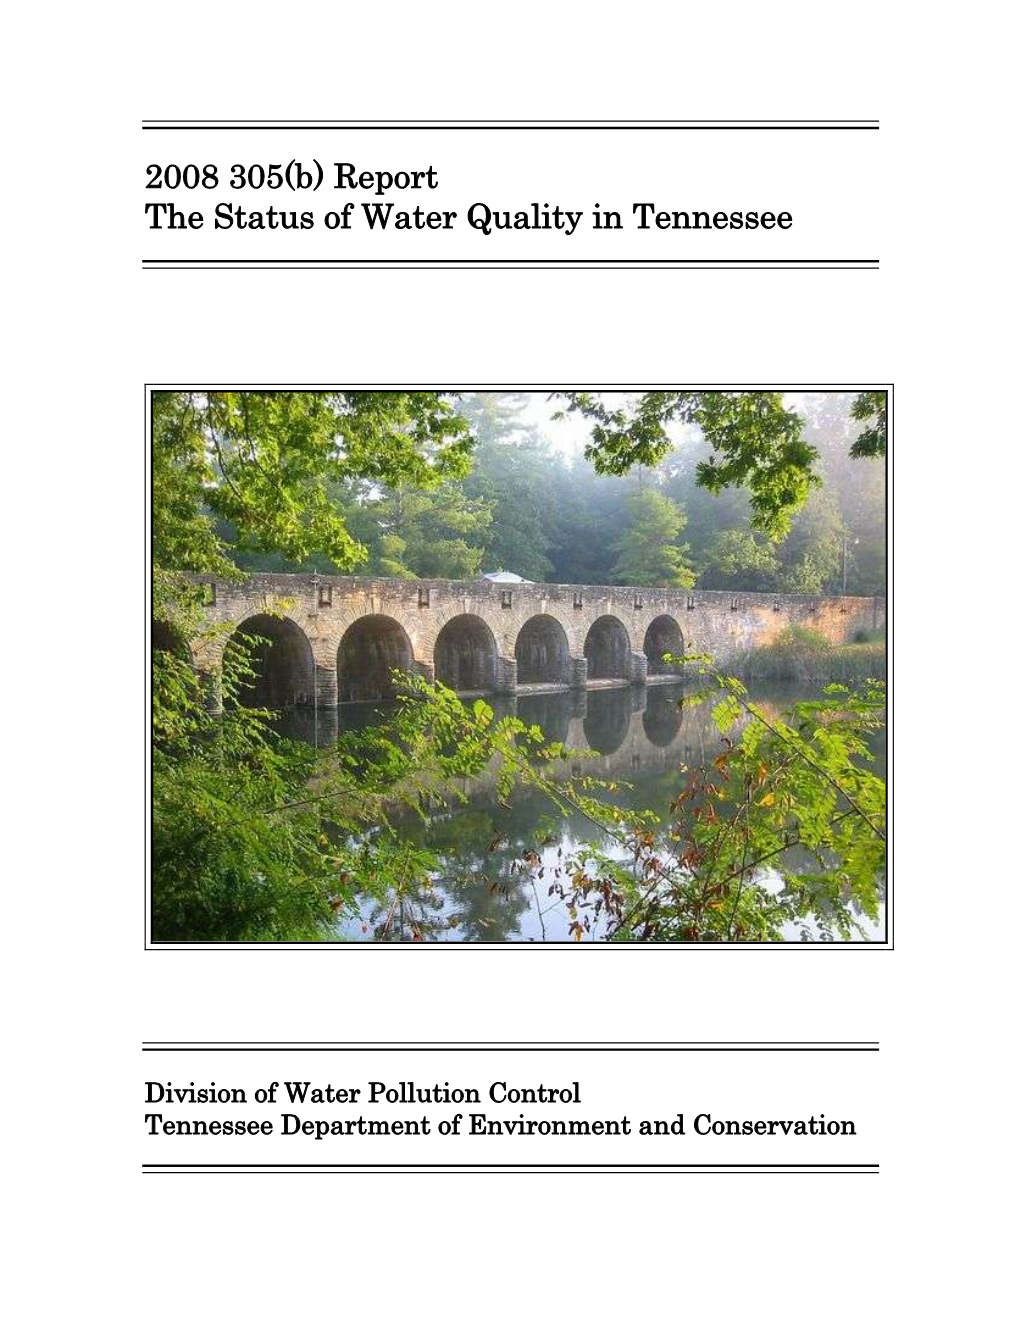 2008 305(B) Report the Status of Water Quality in Tennessee